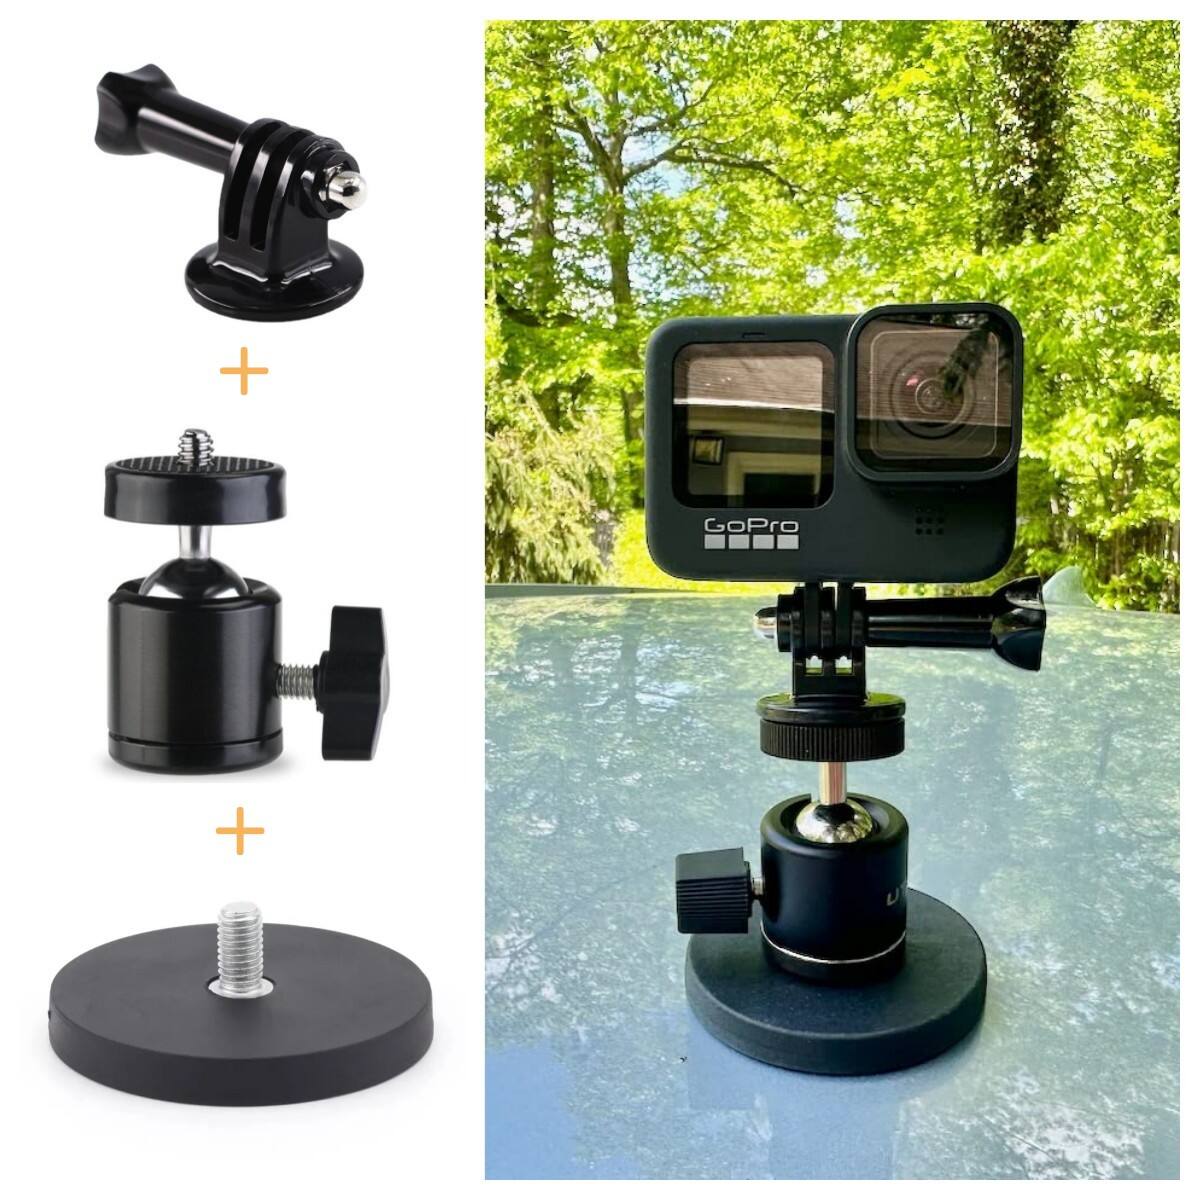 55lbs 360 Rotation Magnetic Phone and for GoPro Camera Mount 1/4 Thread for Mobile Photography and Video Capture details